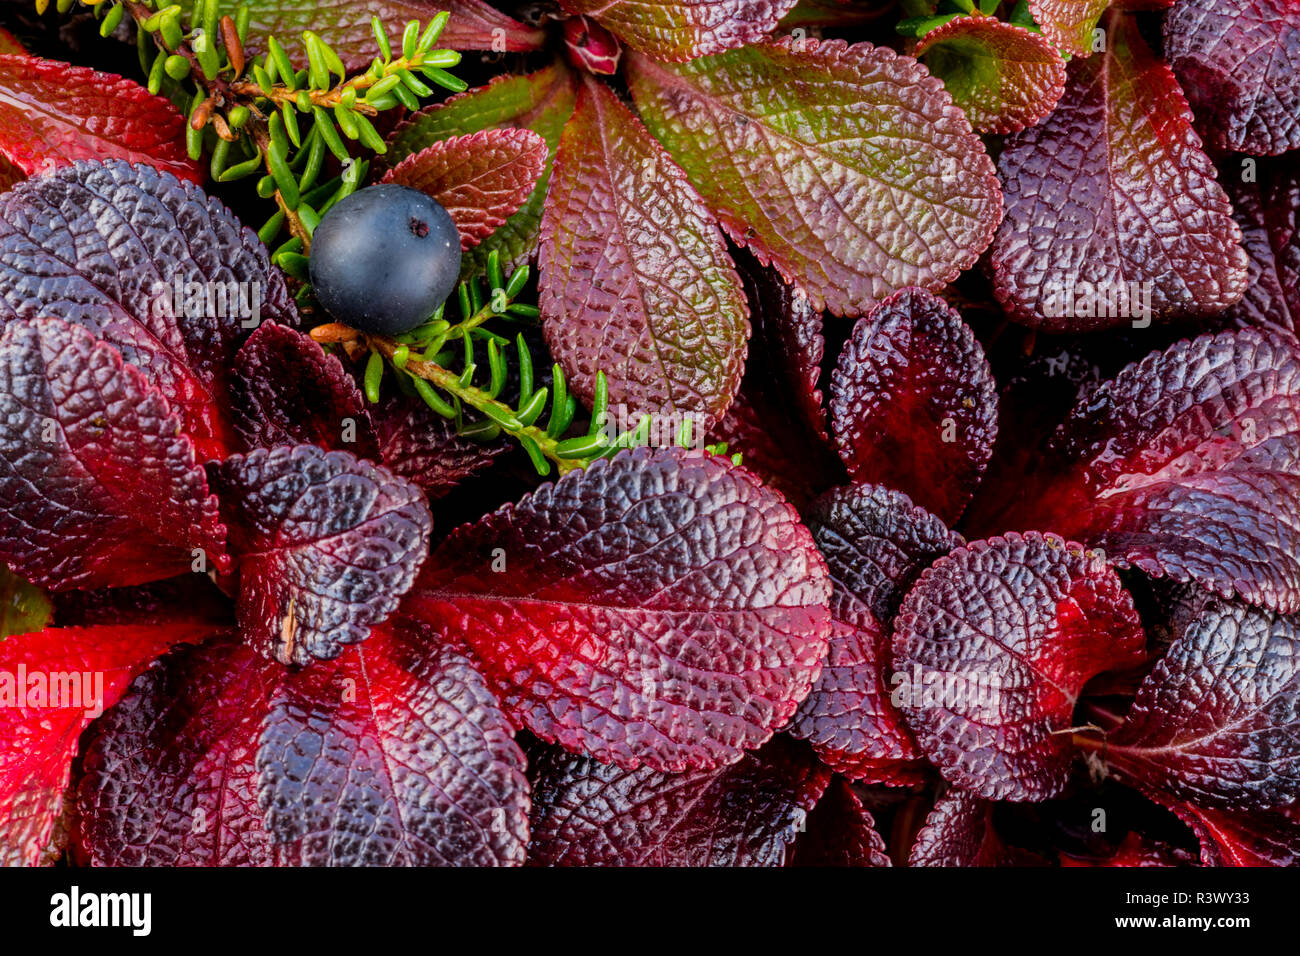 USA, Alaska. Close-up of alpine bearberry and crowberry plants. Stock Photo